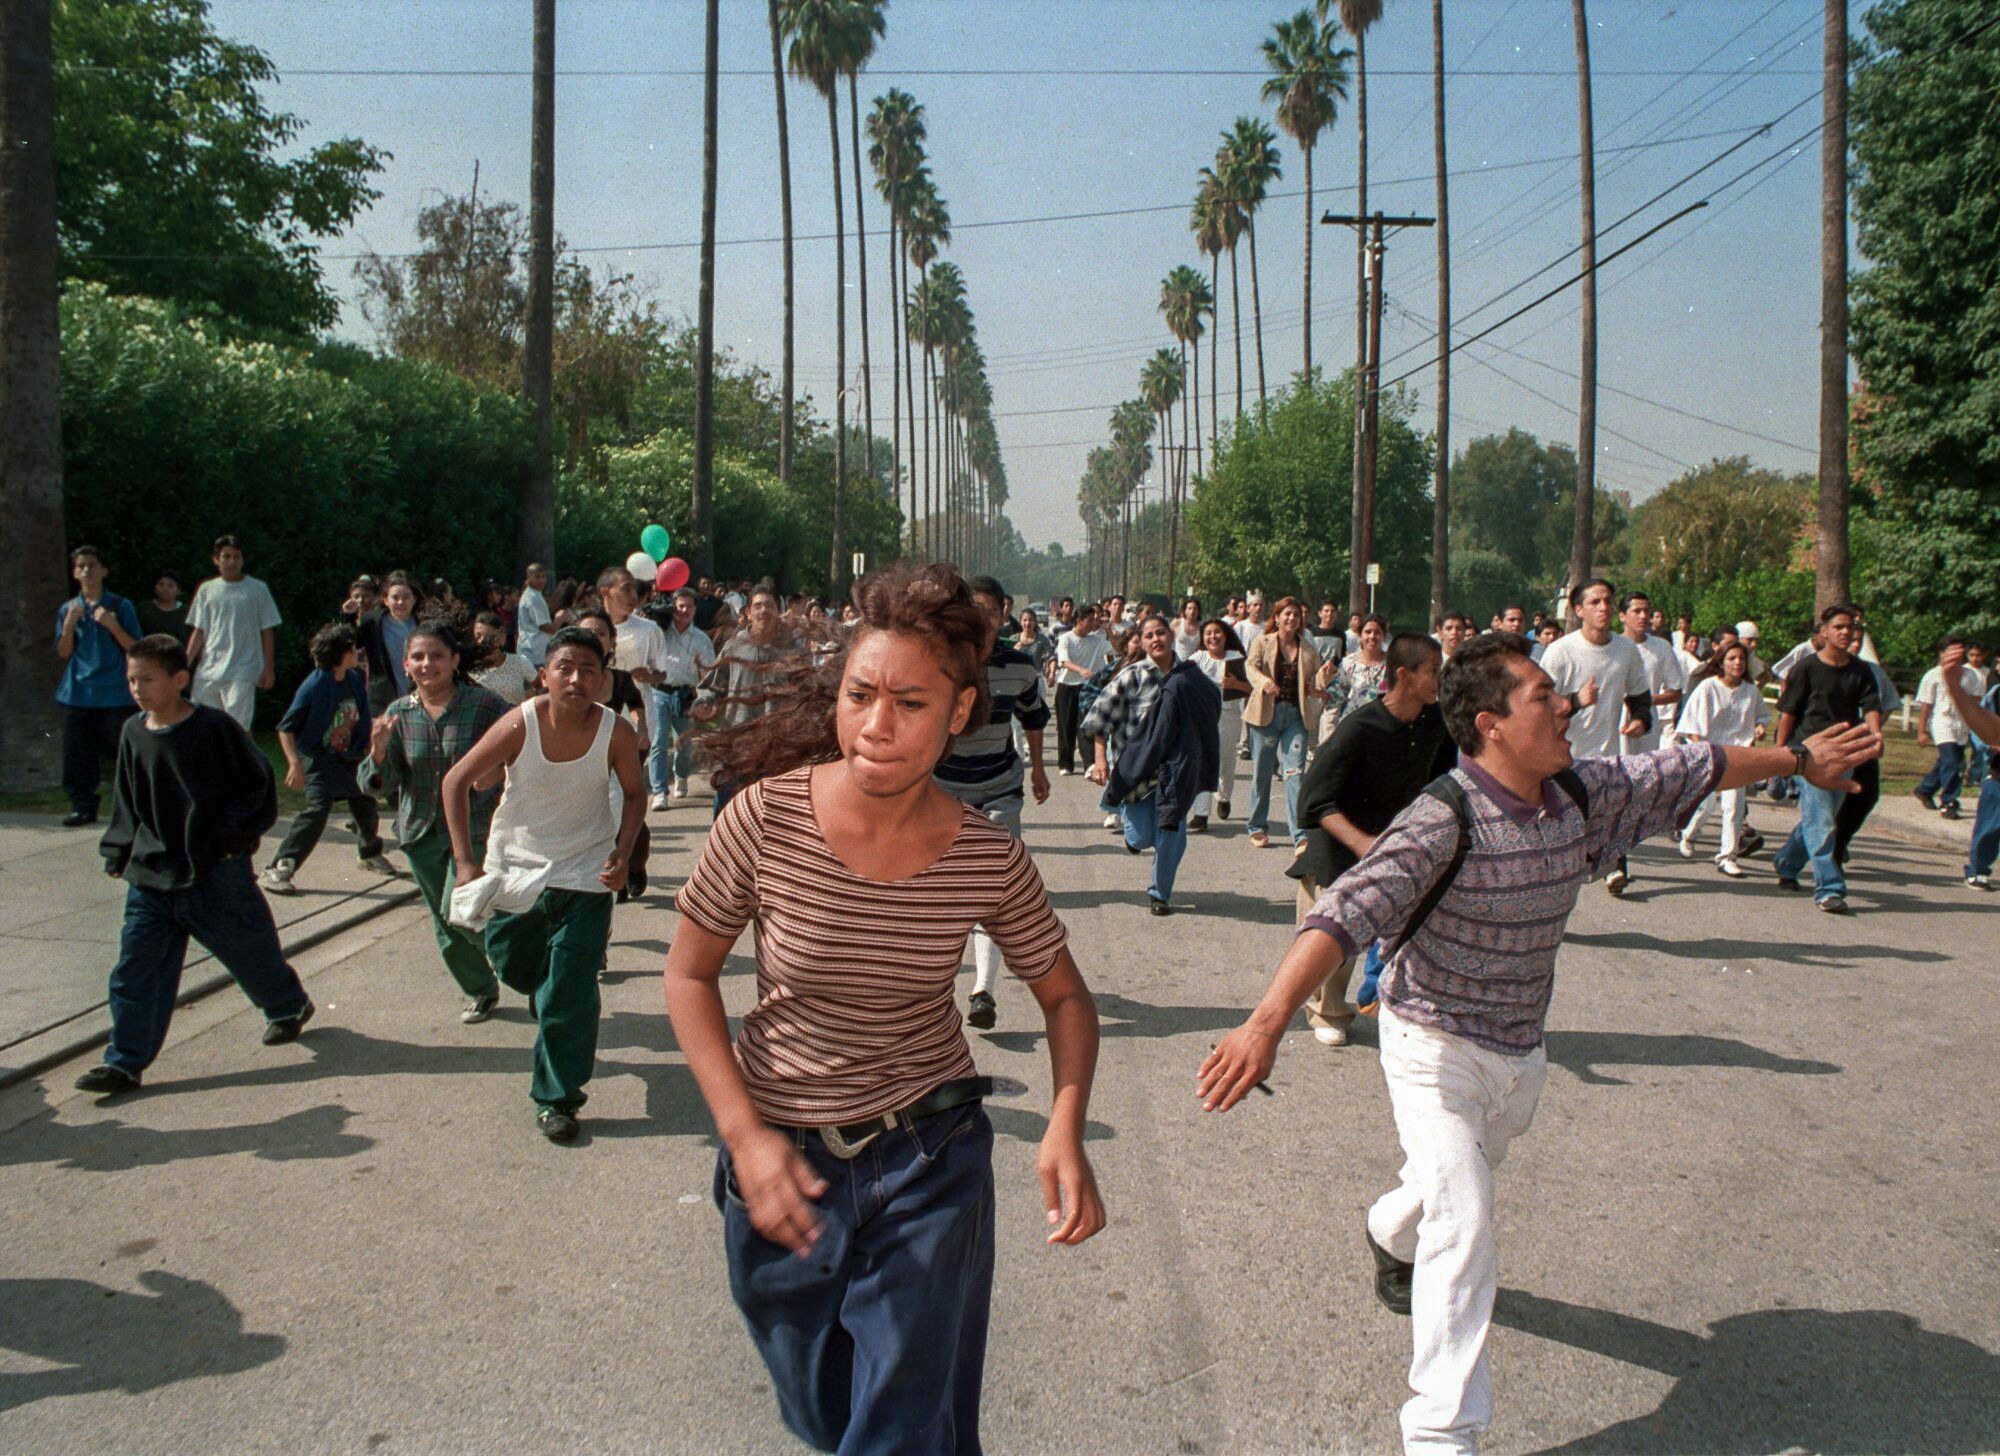 A student protest against Proposition 187 in Van Nuys on Oct. 28, 1994.